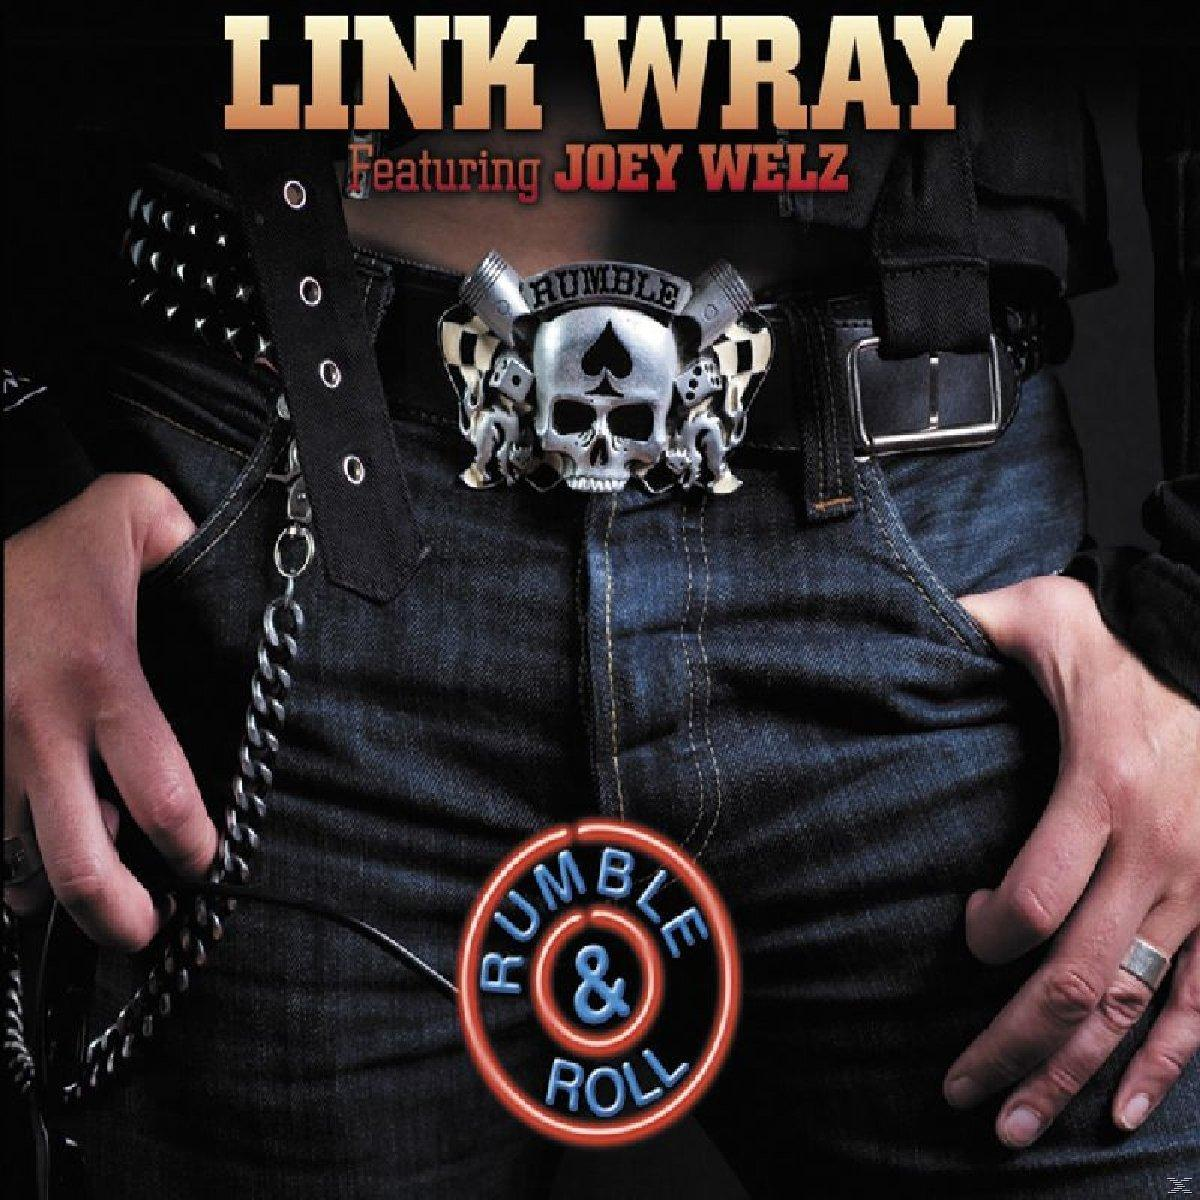 (CD) Roll - Rumble - & Link Wray